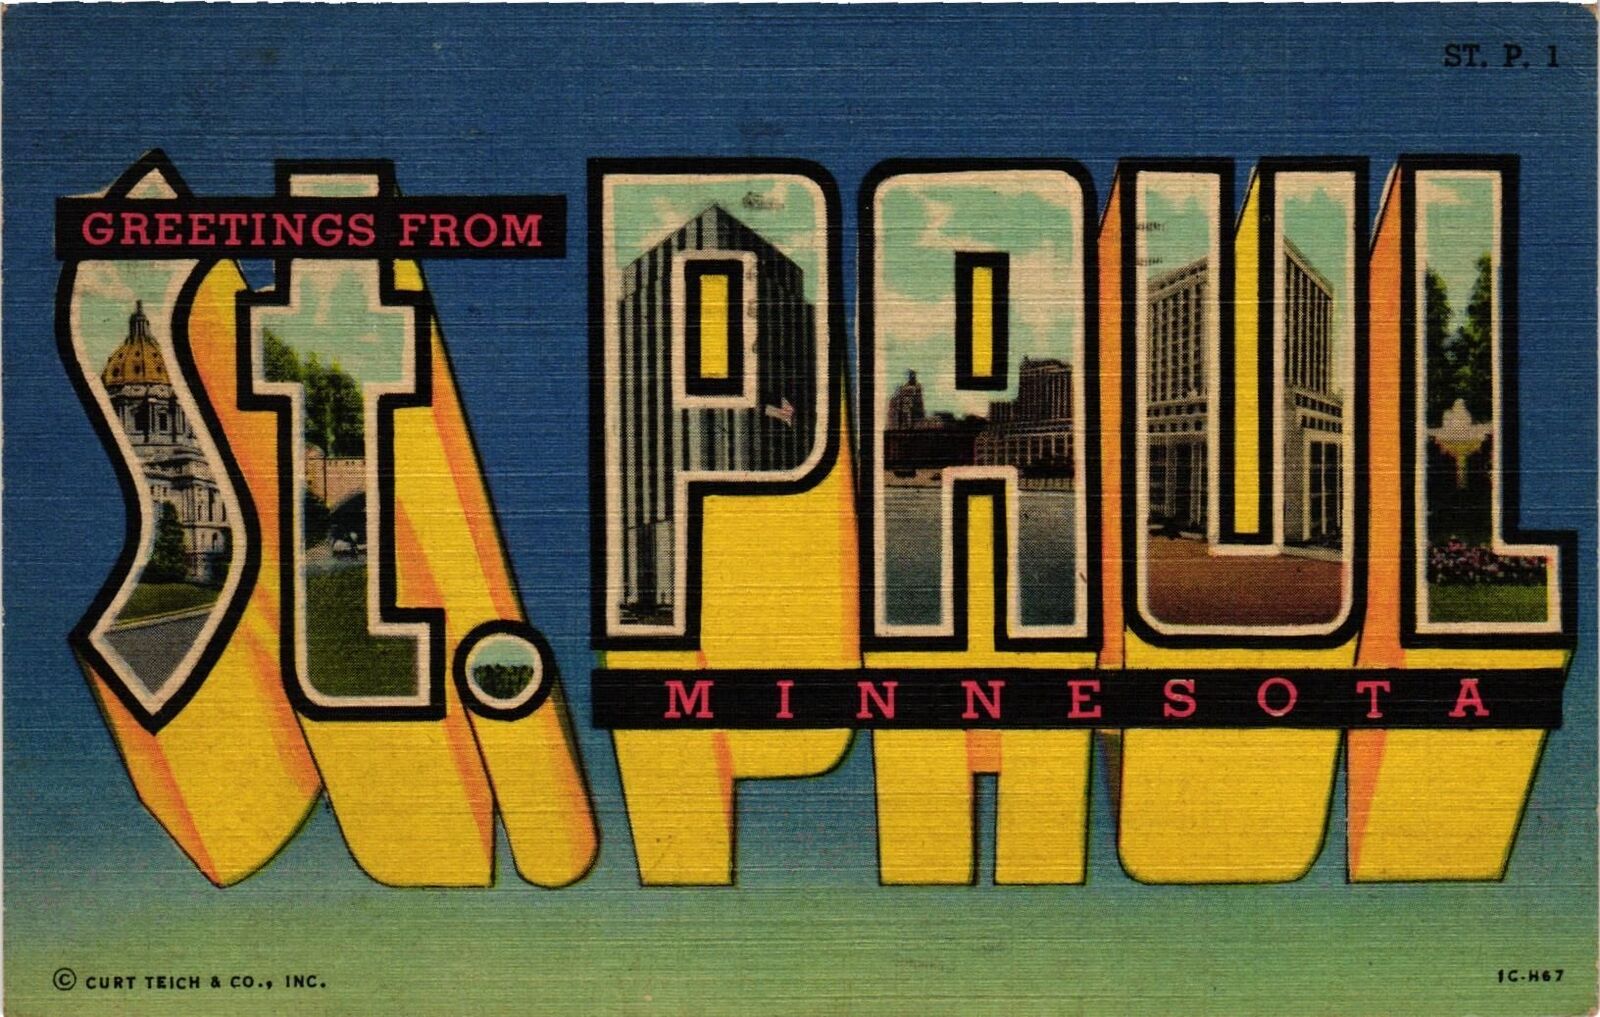 Vintage Postcard- 1C-H67. Greeting From St. Paul. Minnesota. Posted 1952